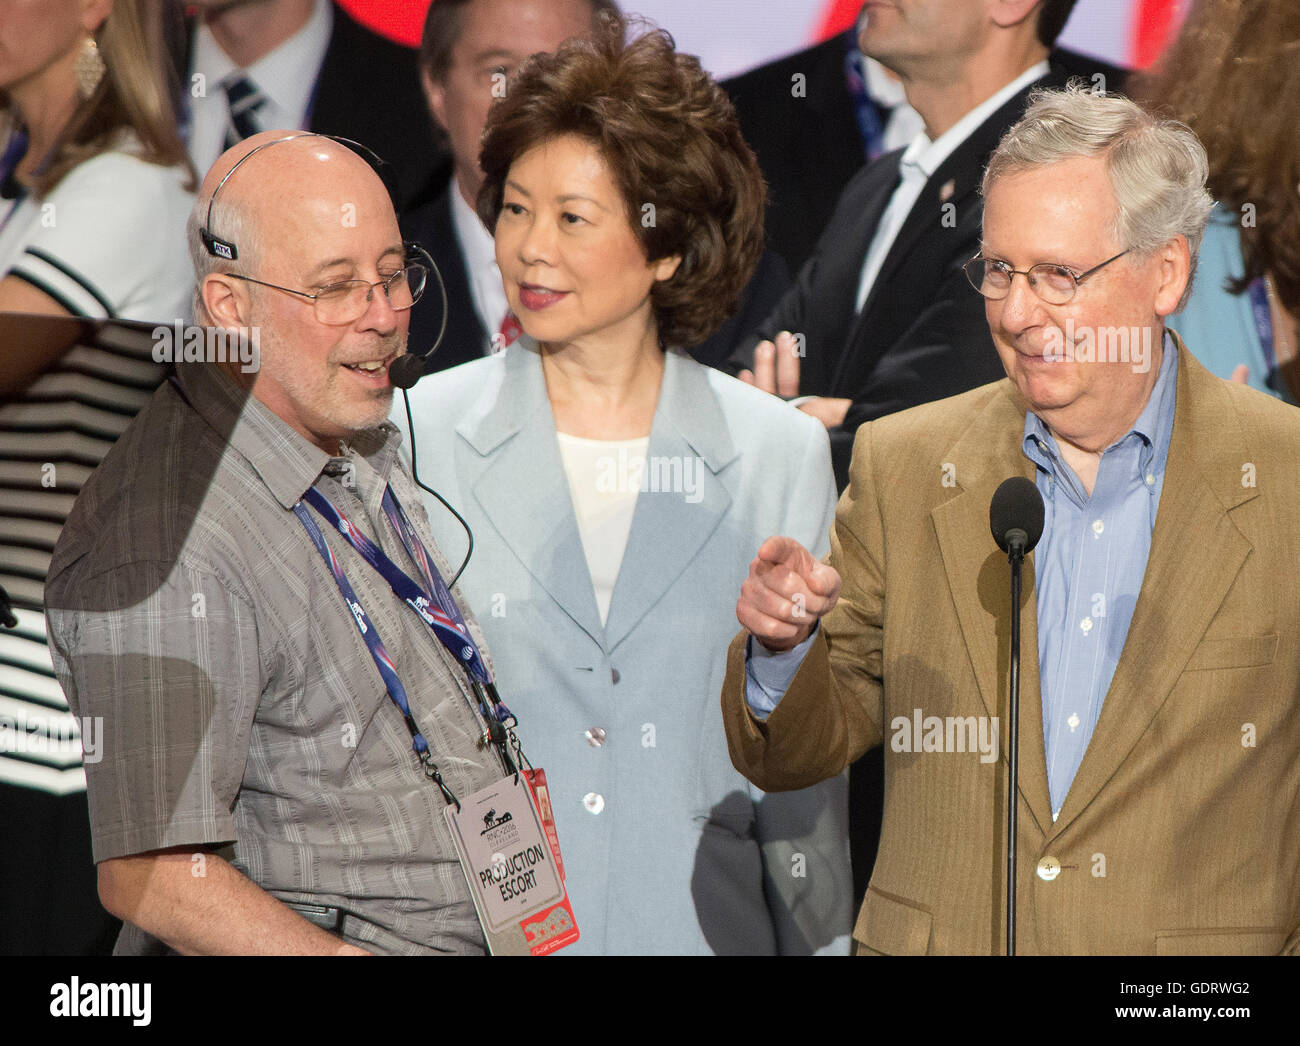 United States Senate Majority Leader Mitch McConnell (Republican of Kentucky) and his wife, Elaine Chao participate in a rehearsal prior to the 2016 Republican National Convention in Cleveland, Ohio on Sunday, July 17, 2016. Credit: Ron Sachs / CNP (RESTRICTION: NO New York or New Jersey Newspapers or newspapers within a 75 mile radius of New York City) - NO WIRE SERVICE - Stock Photo